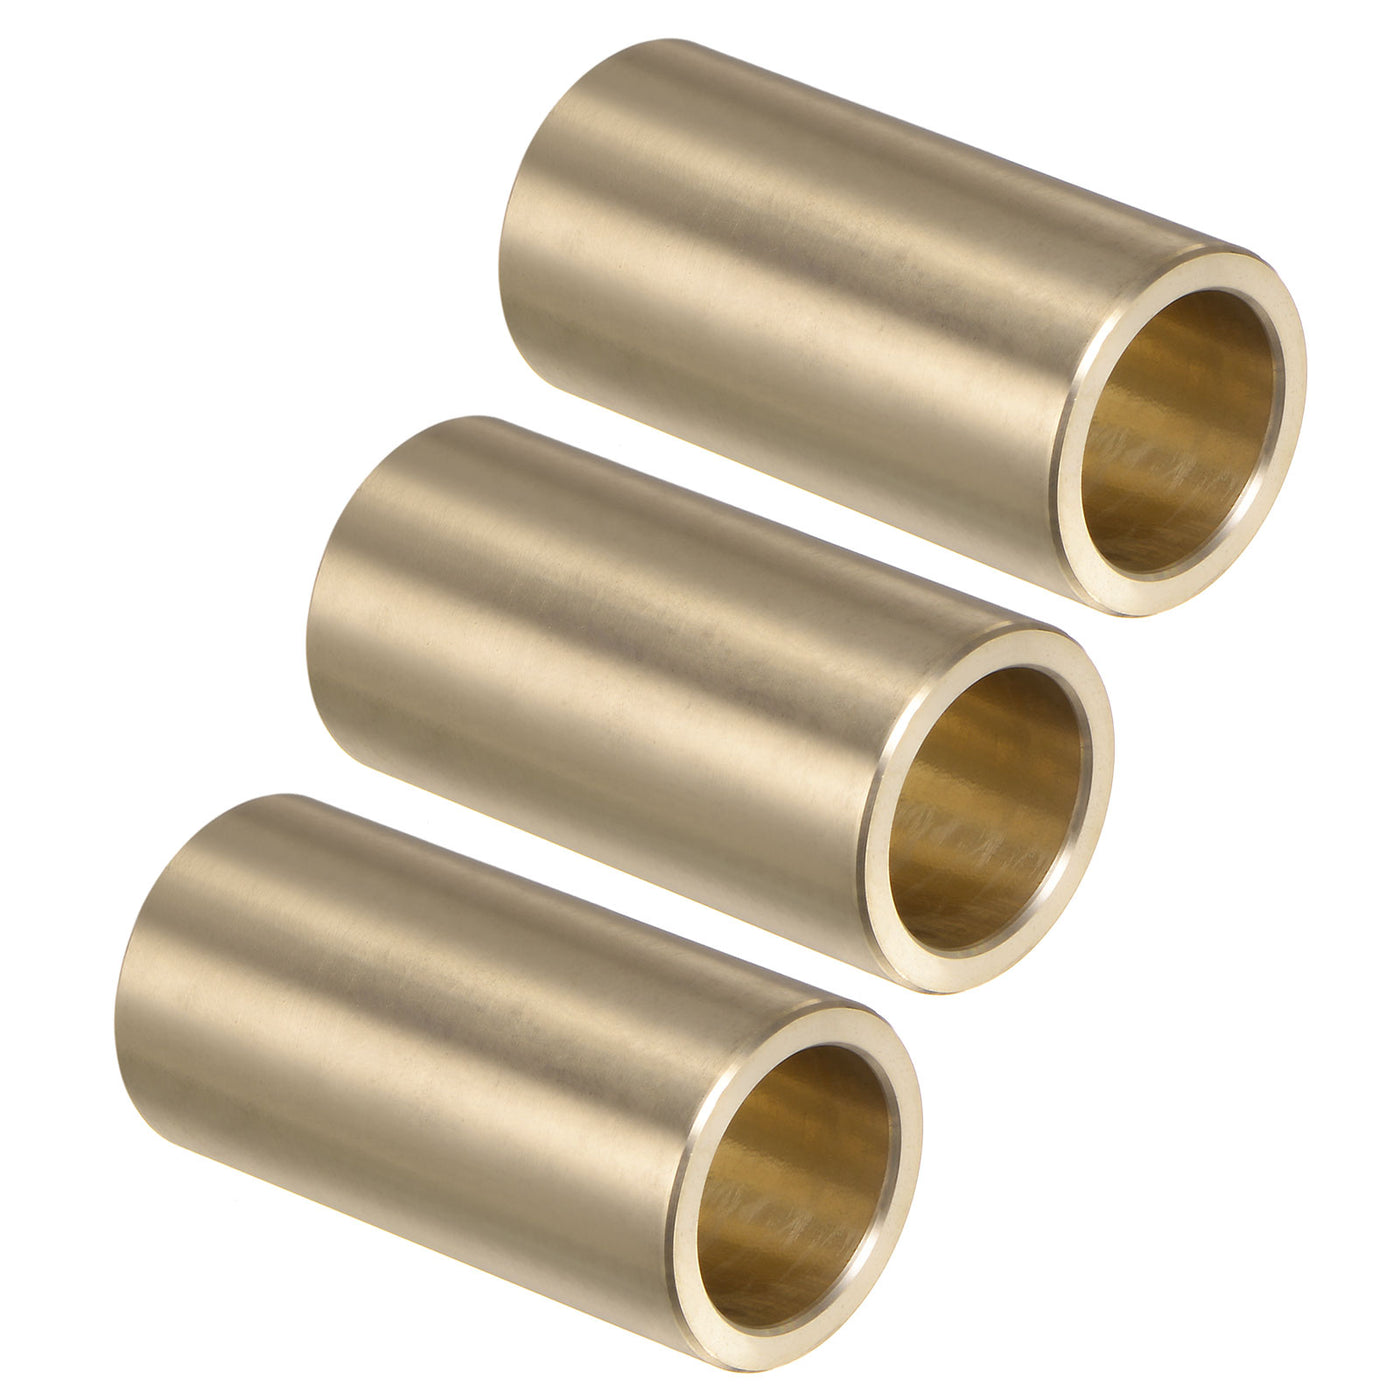 uxcell Uxcell 3pcs Sleeve Bearings 3/4" x 1" x 2" Wrapped Oilless Bushings Cast Brass